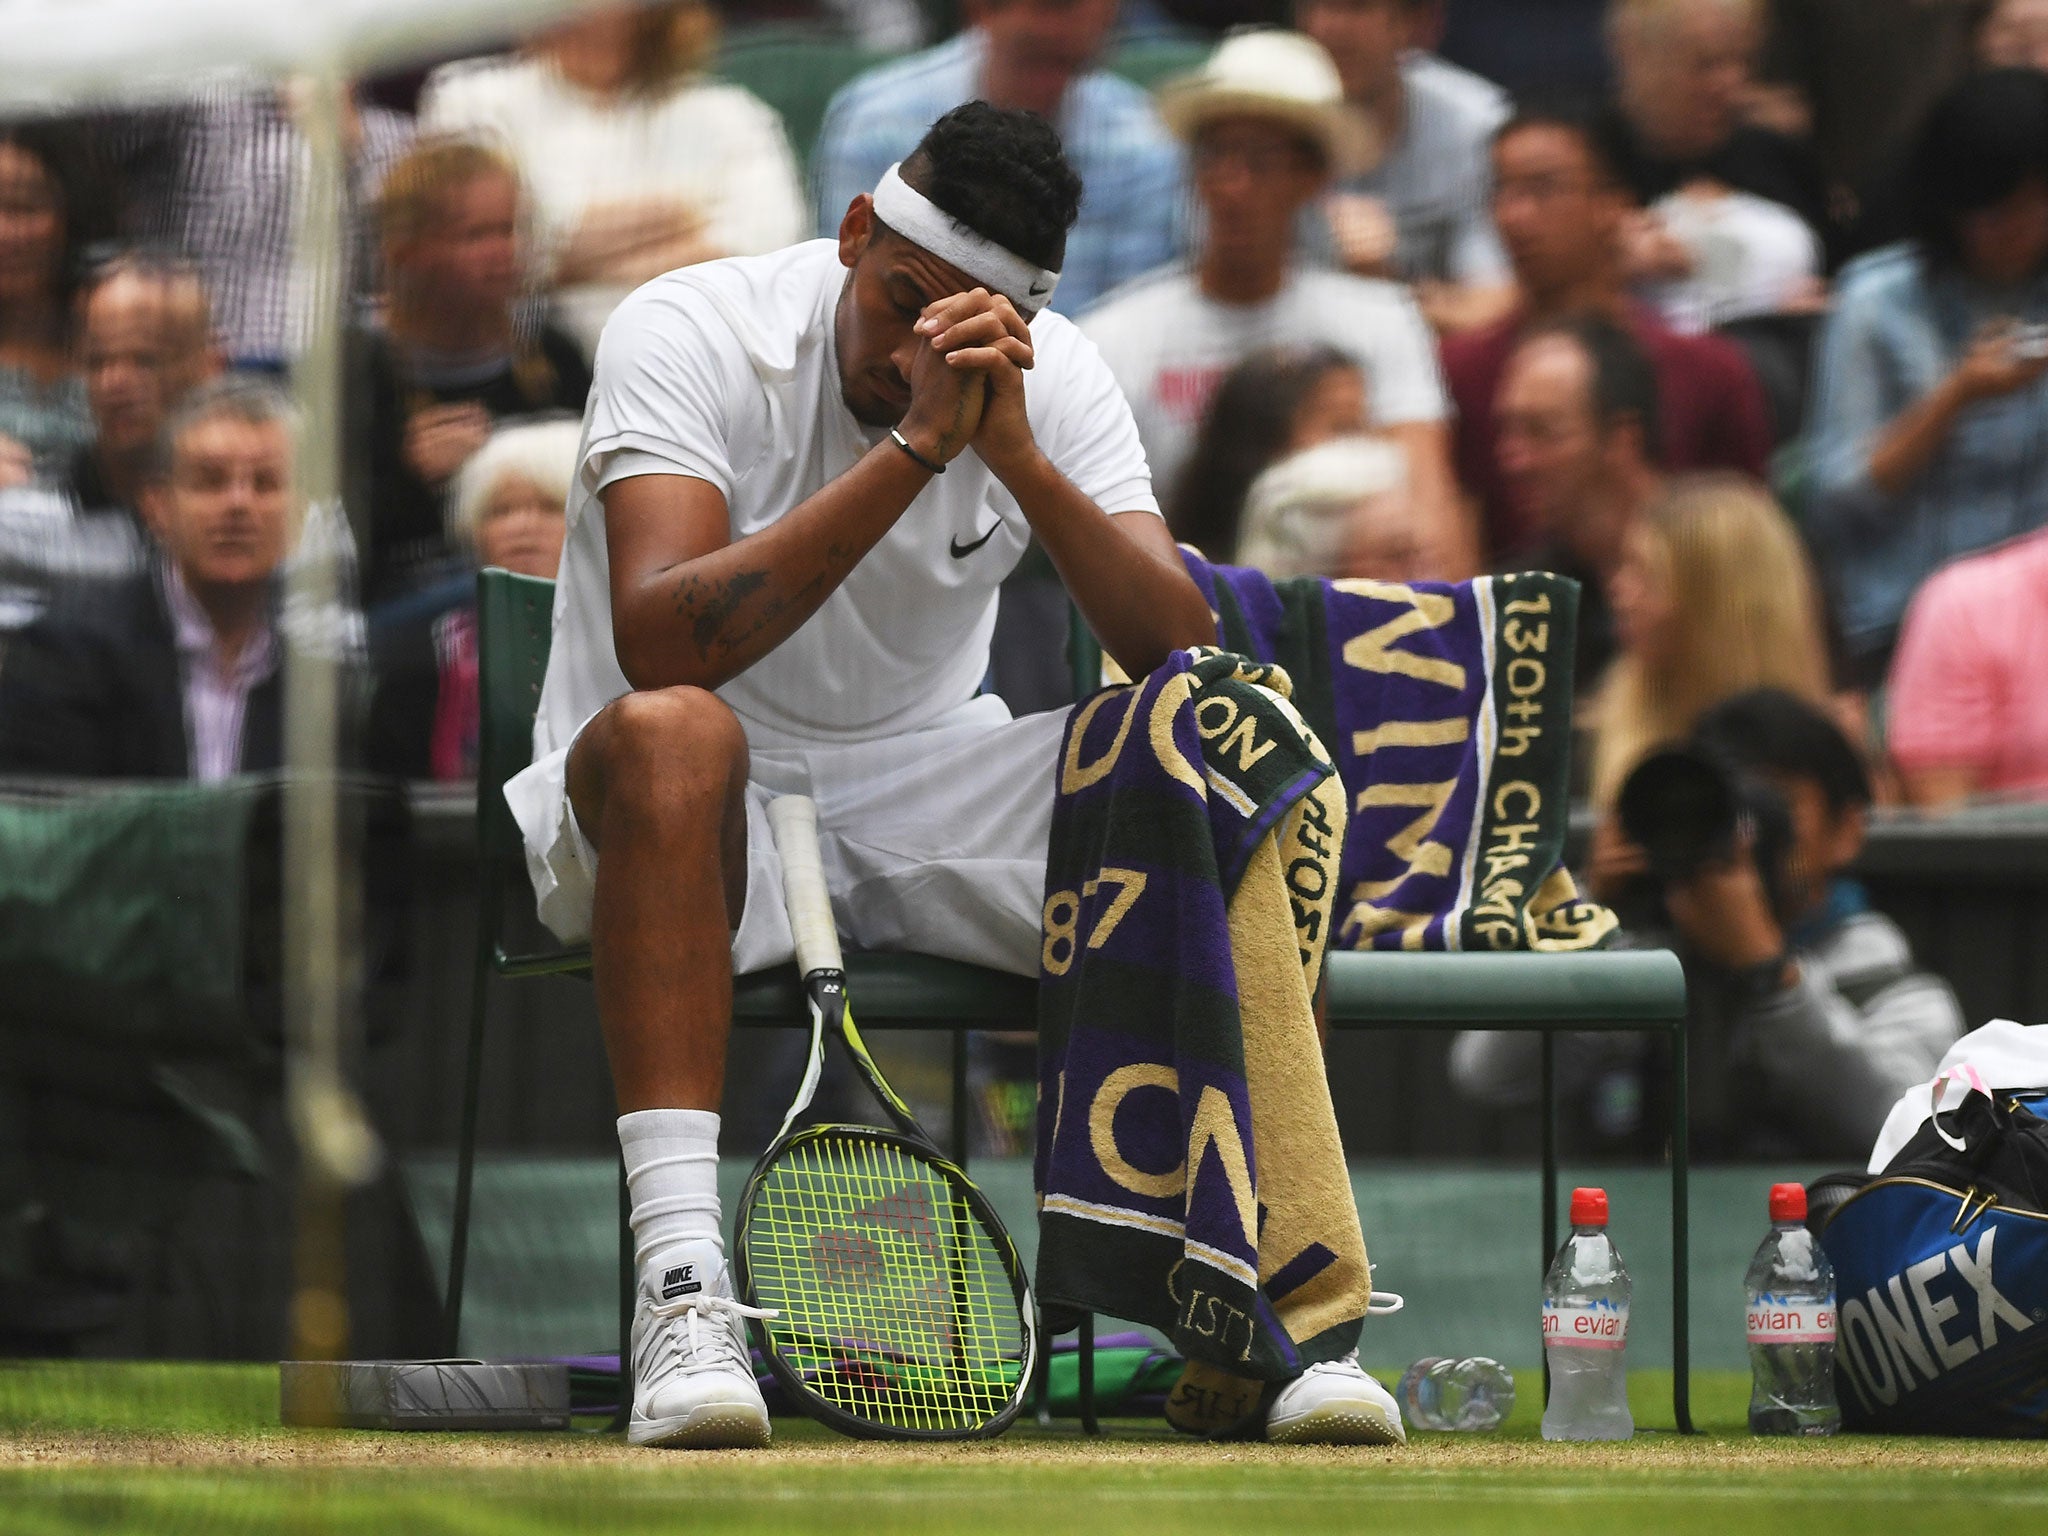 Nick Kyrgios is lost for answers during his defeat to Andy Murray